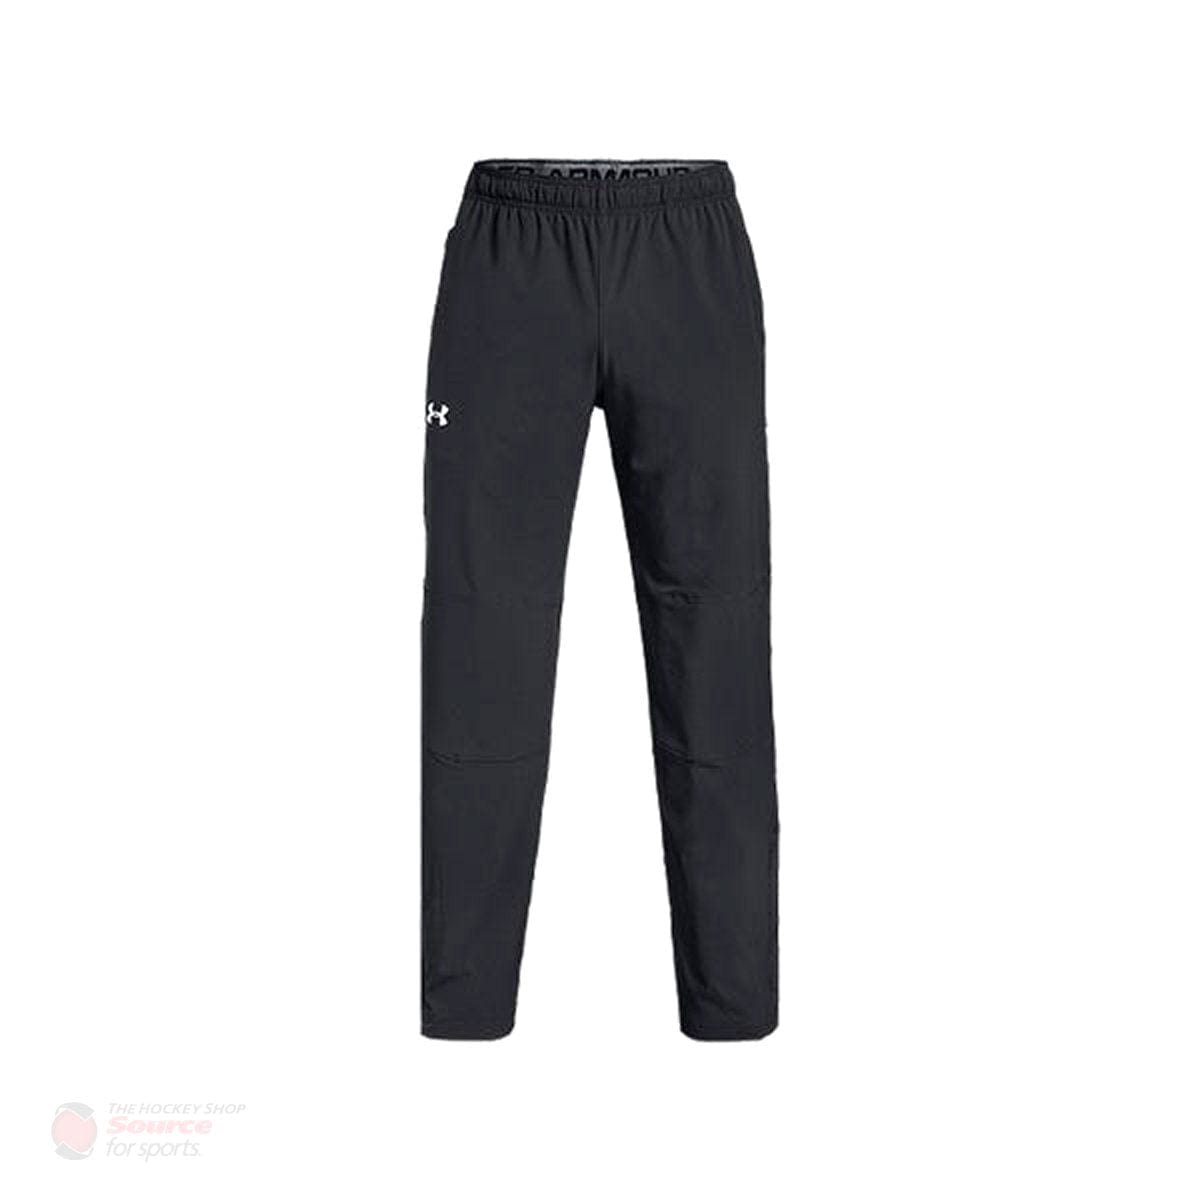 Under Armour Hockey Warm Up Youth Pants